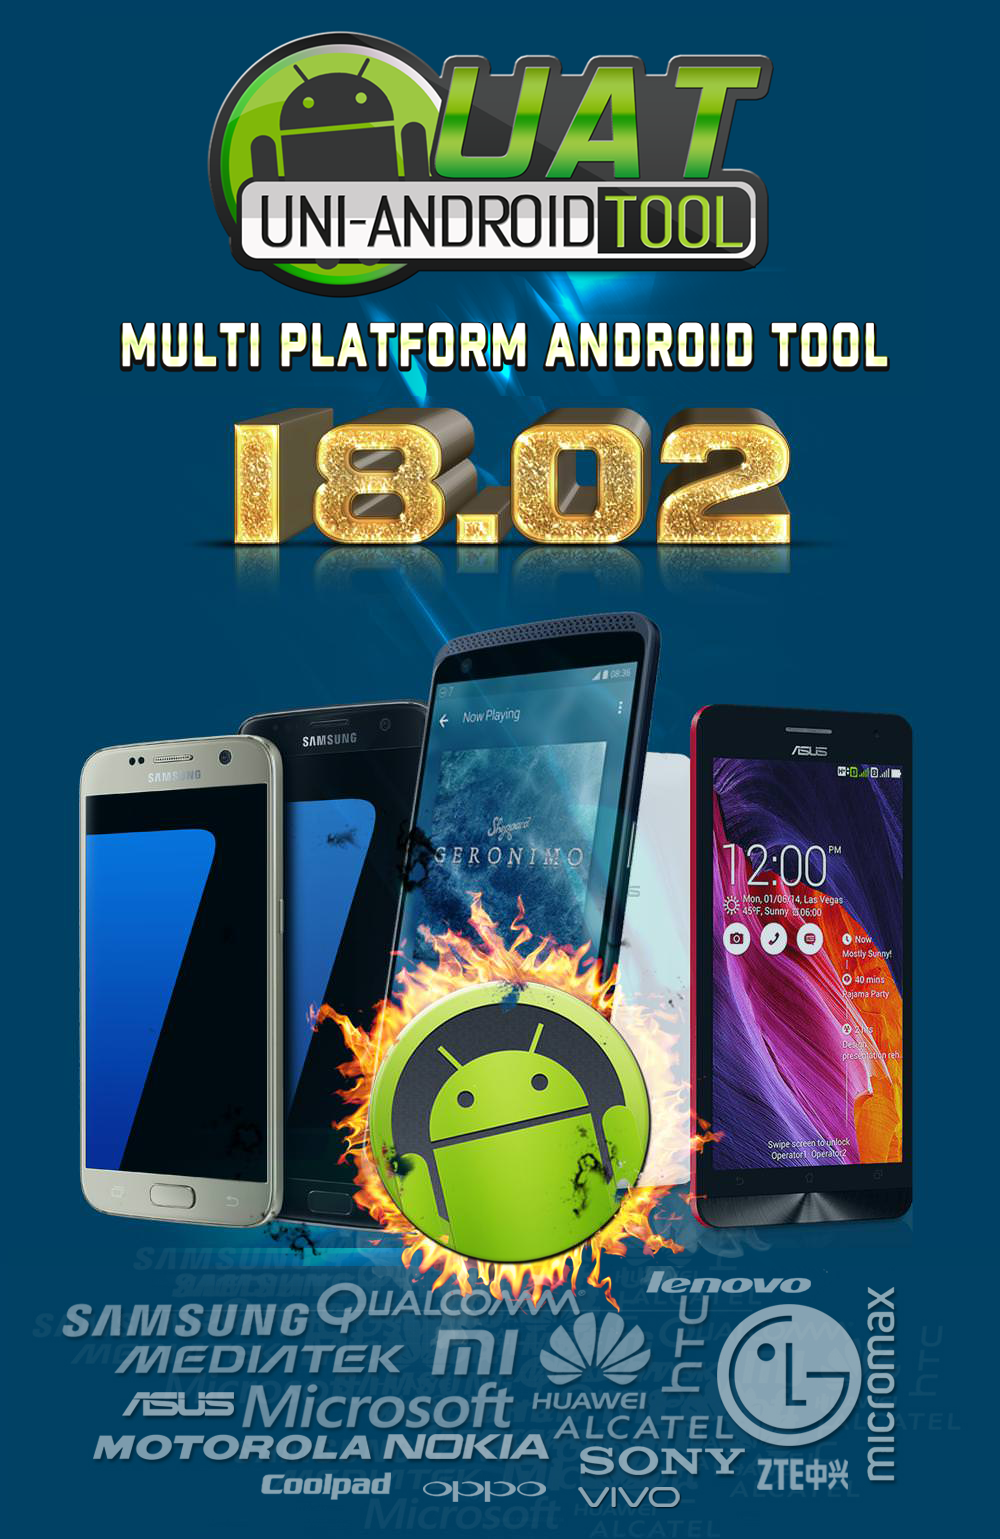 Thumbs up Uni-Android Tool [UAT] Version 18.02 Released – 7th June 2018